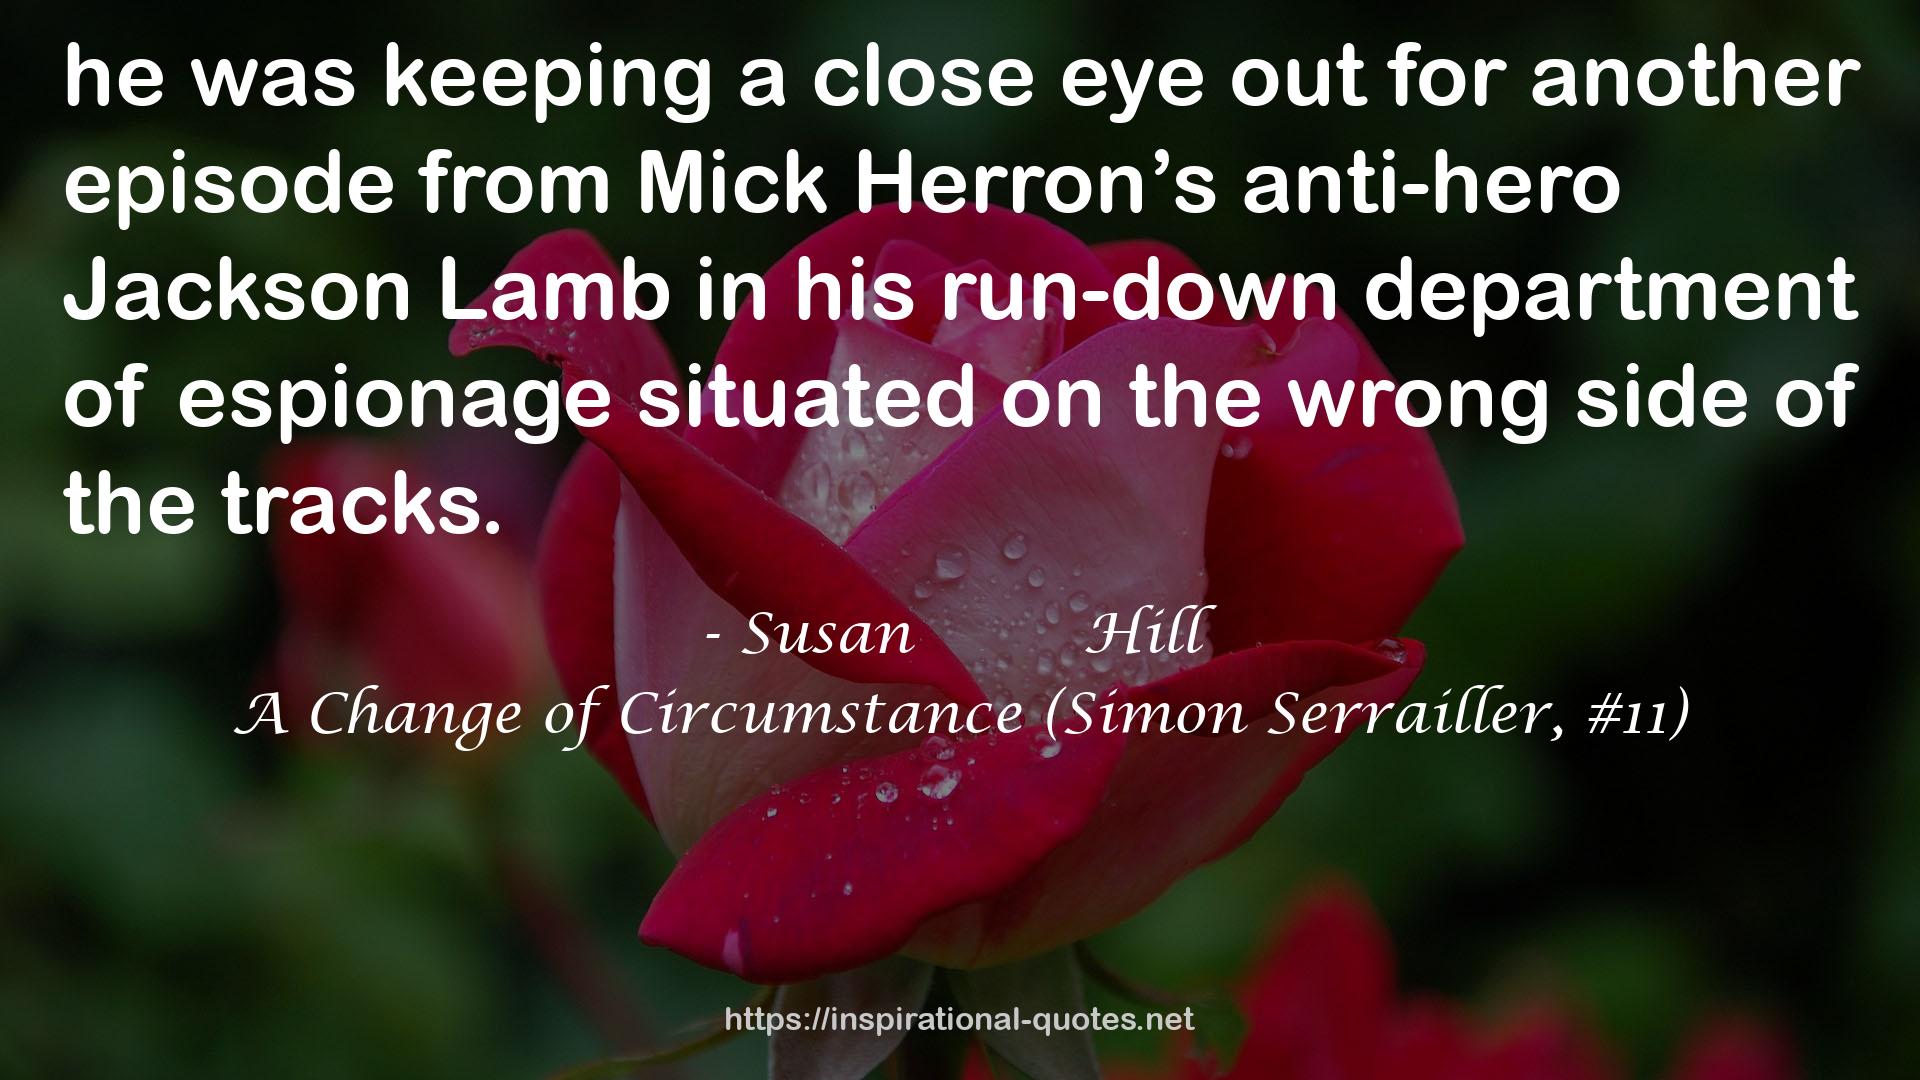 A Change of Circumstance (Simon Serrailler, #11) QUOTES